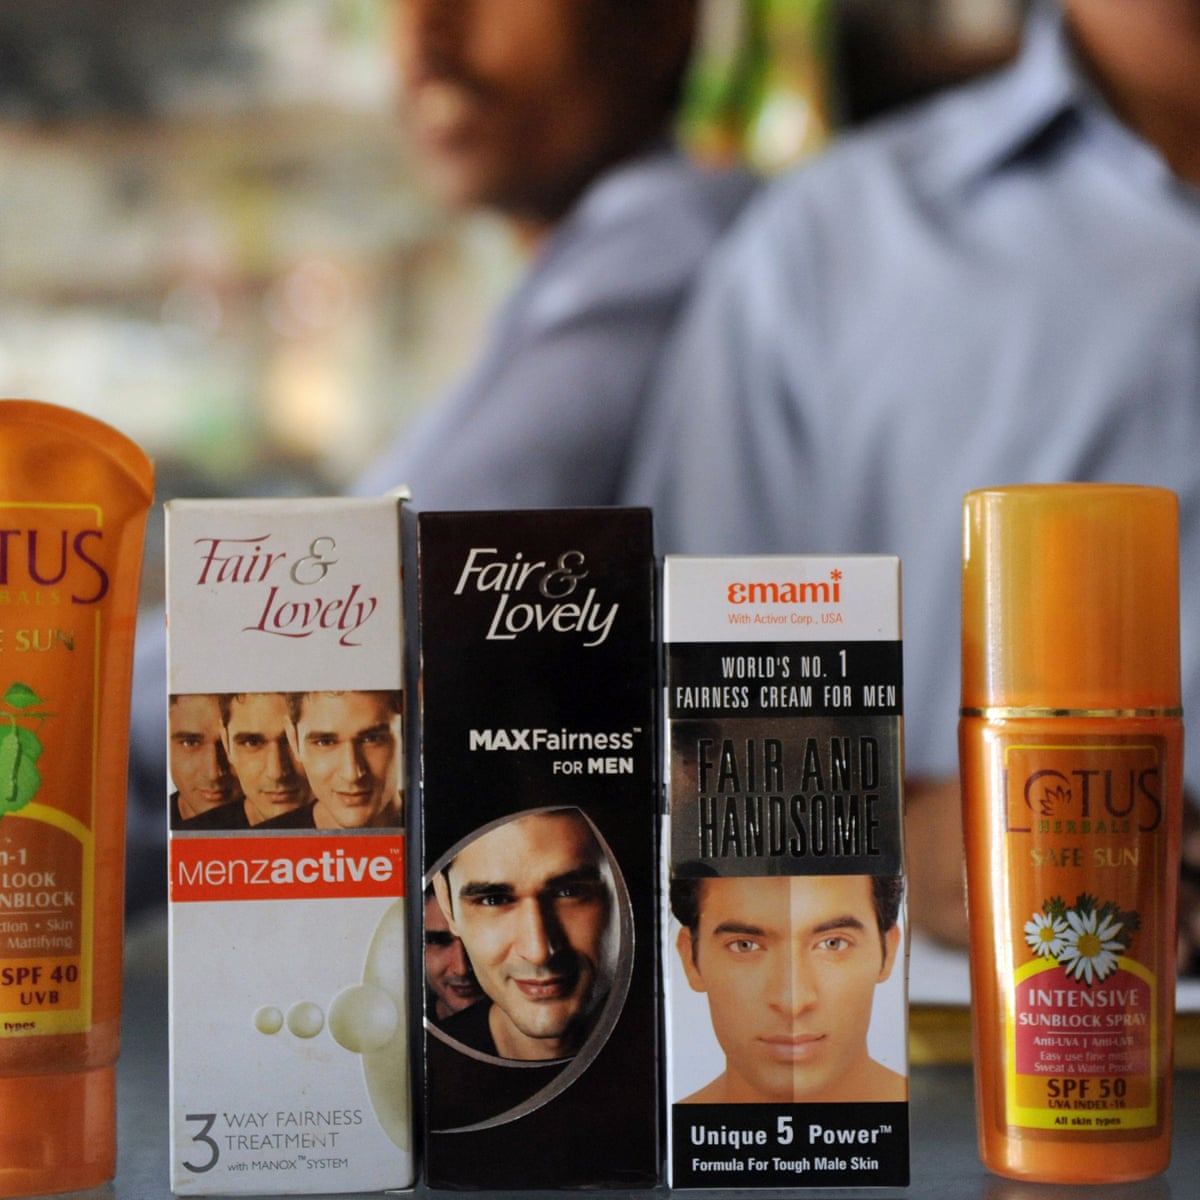 Skin-lightening creams are dangerous – yet business is booming. Can the  trade be stopped? | Race | The Guardian